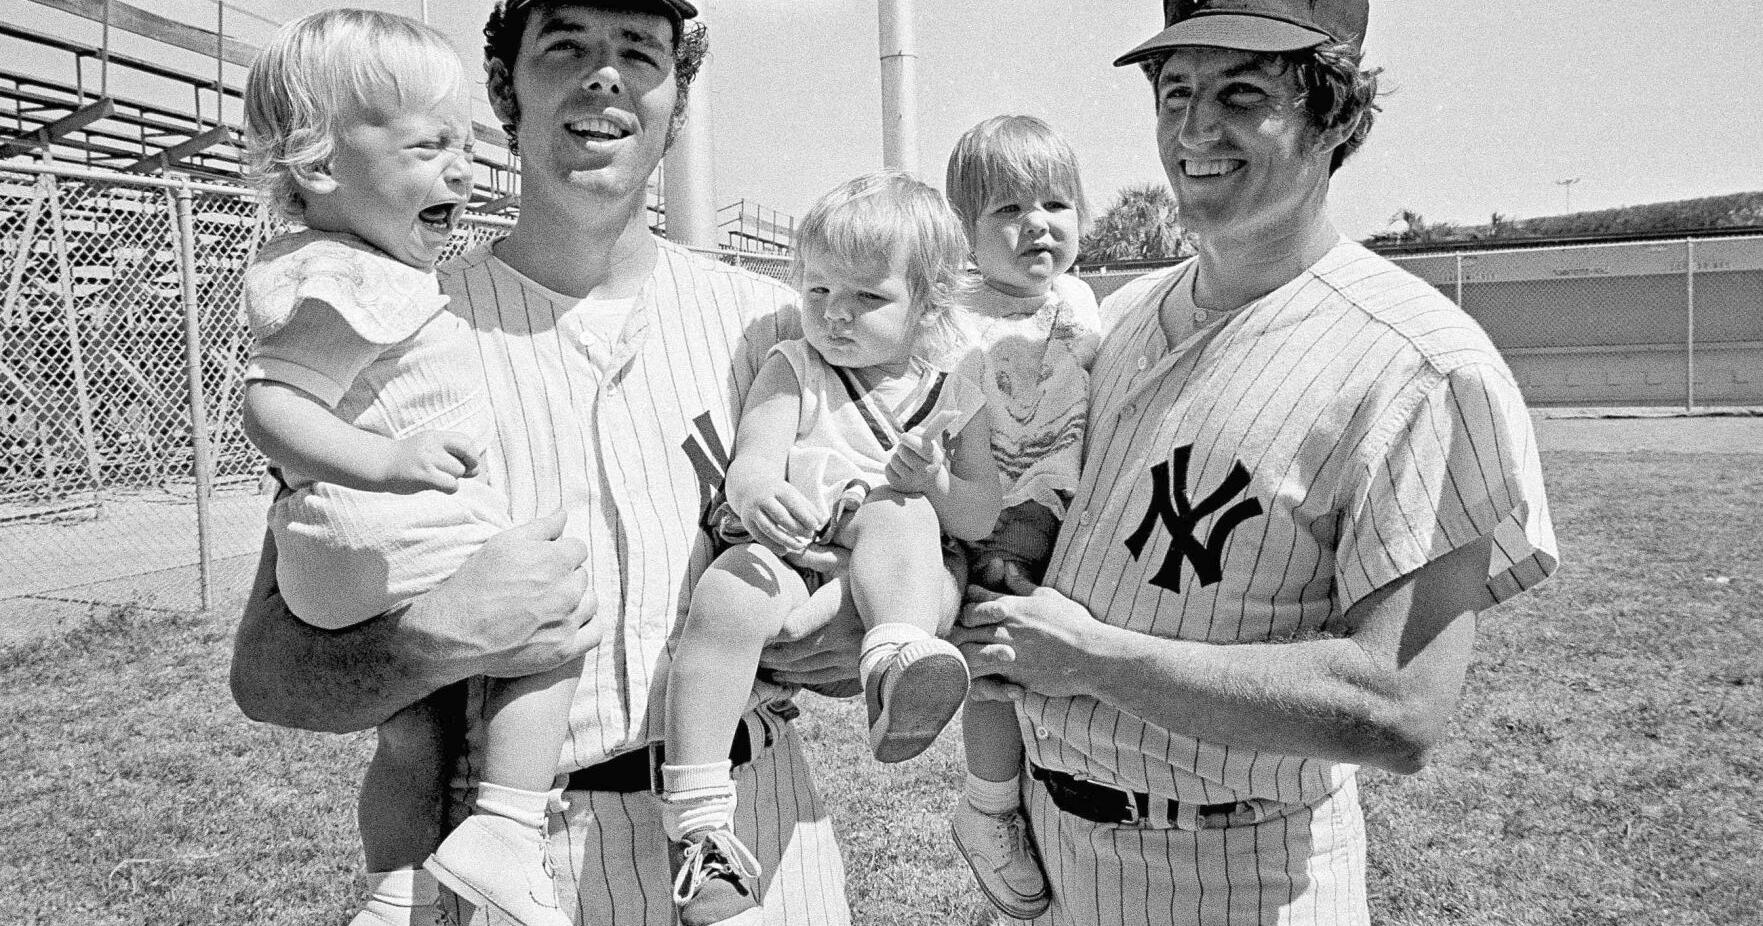 Fritz Peterson, Yankees pitcher who traded wives with teammate Mike Kekich, dies at age 81